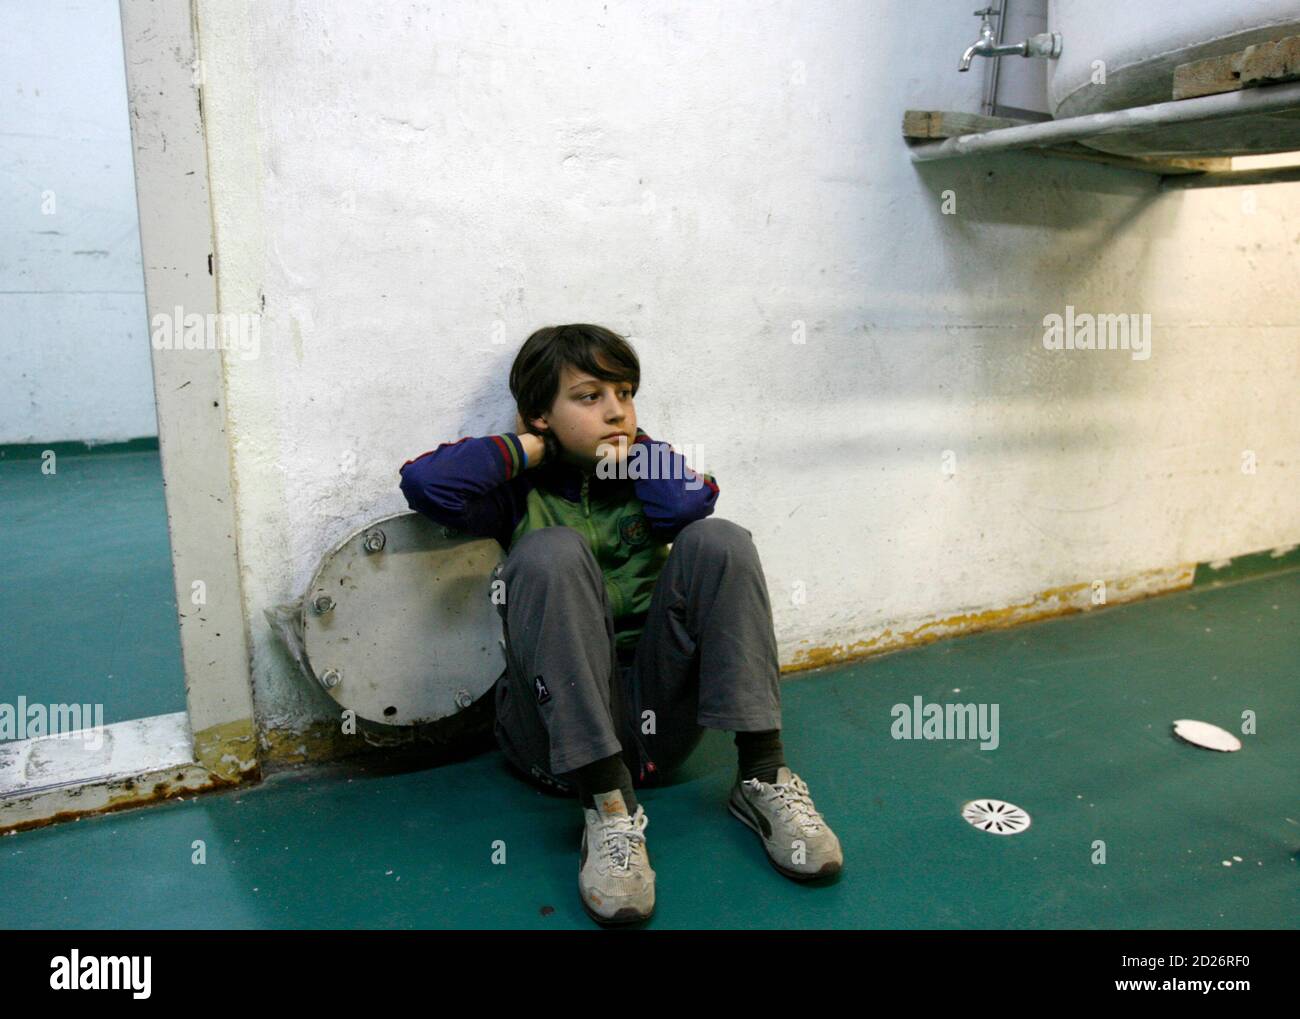 An Israeli student sits inside a bomb shelter during a civil defence drill in a school in Jerusalem April 8, 2008. Air raid sirens sent Israeli schoolchildren into bomb shelters on Tuesday as part of a five-day nationwide exercise to prepare for any future conflict that would include rocket attacks on Israel's major cities.  REUTERS/Gil Cohen Magen (JERUSALEM) Stock Photo